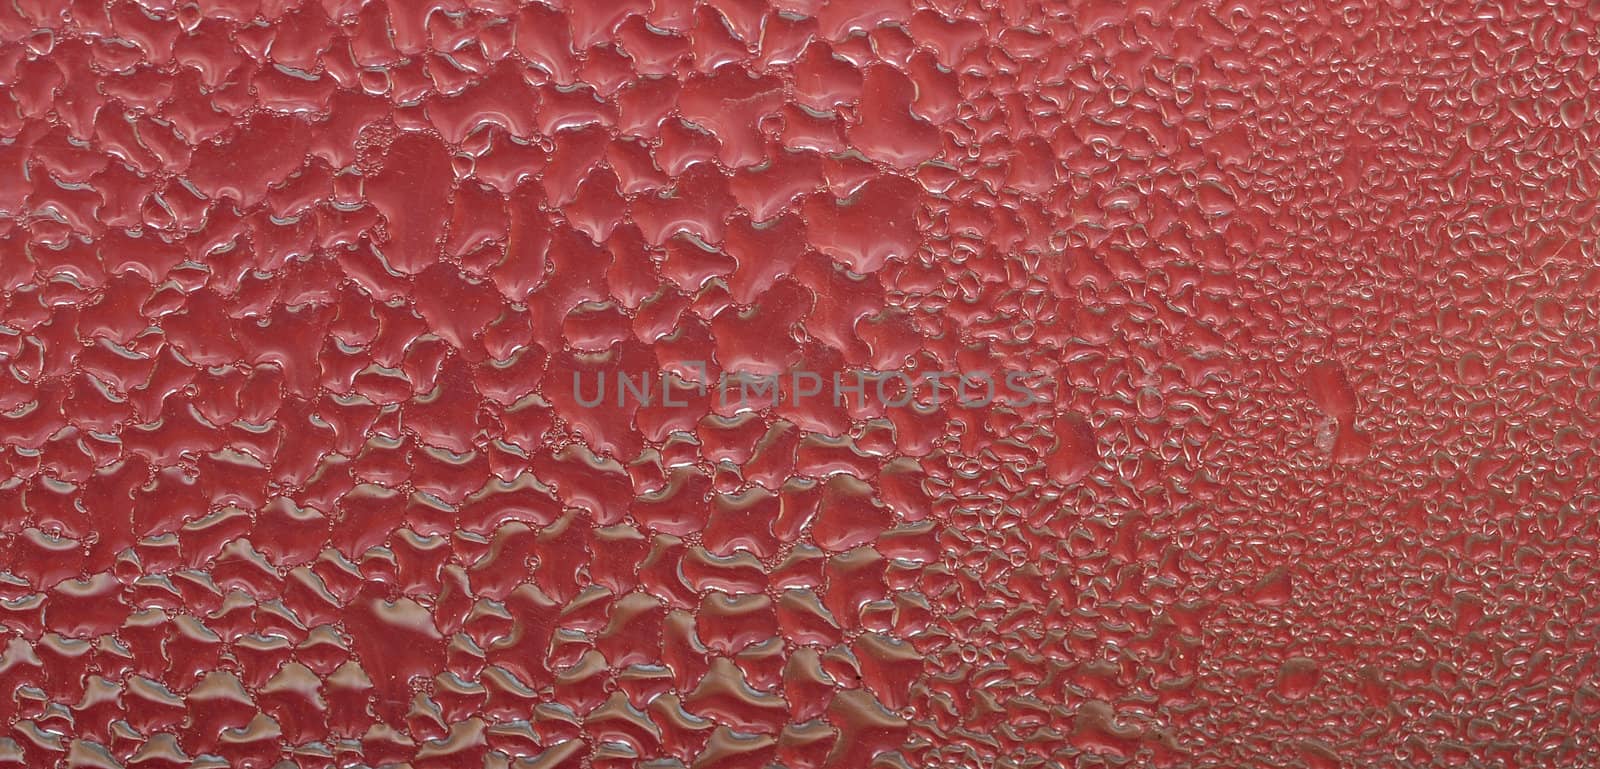 Water drops on abstract red surface.